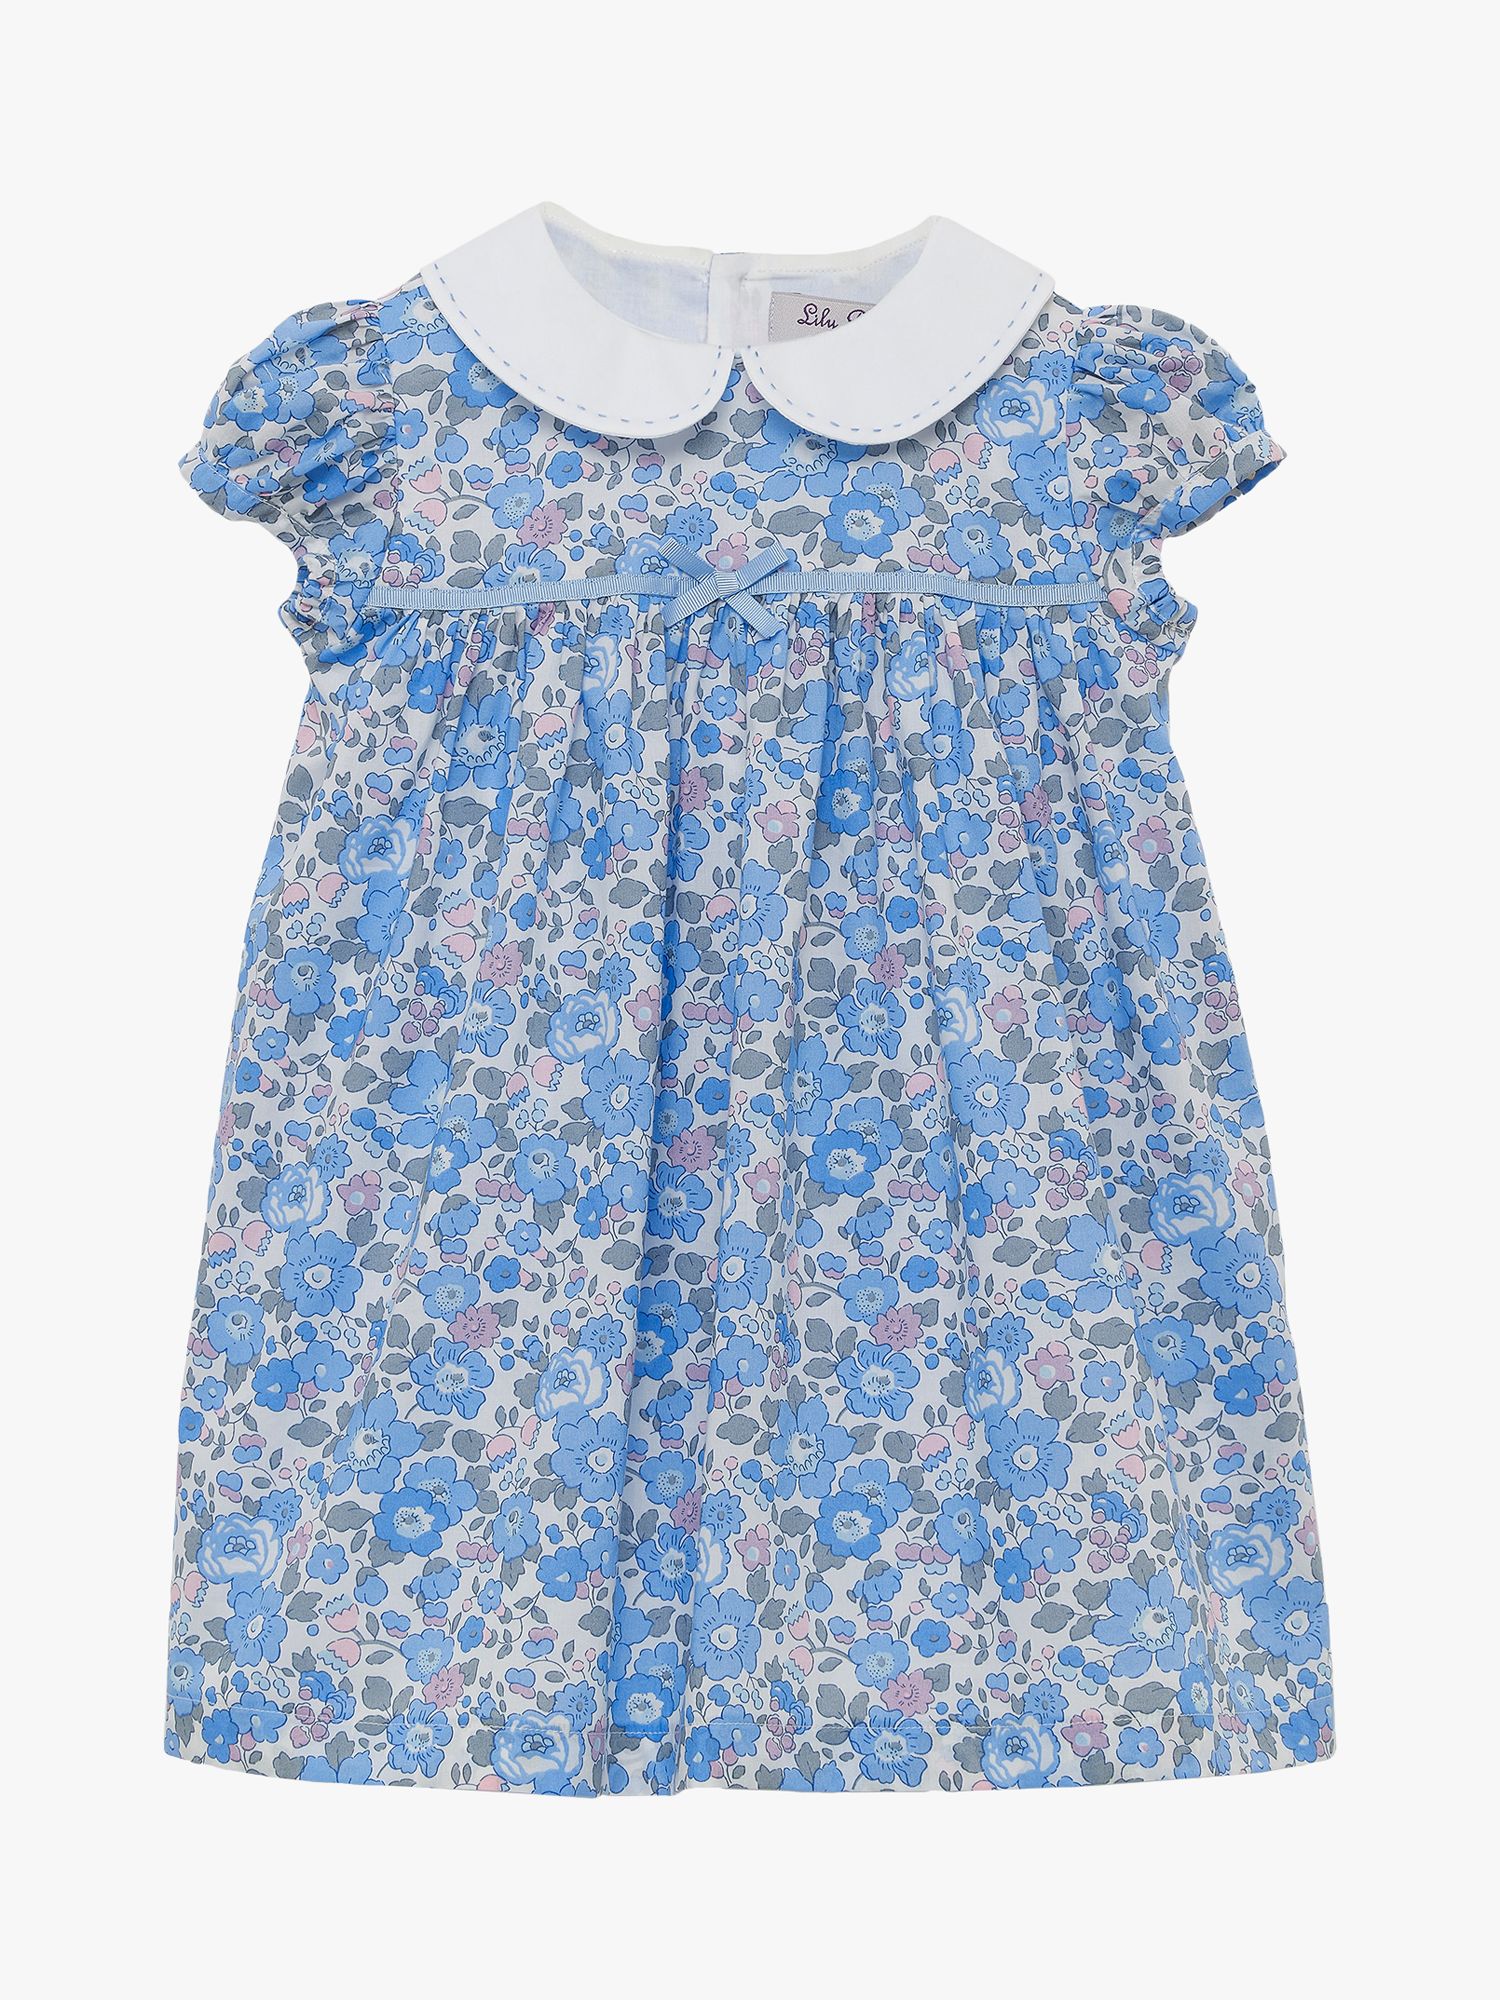 Trotters Lily Rose Baby Betsy Liberty Floral Print Dress, Blue, 3-6 months